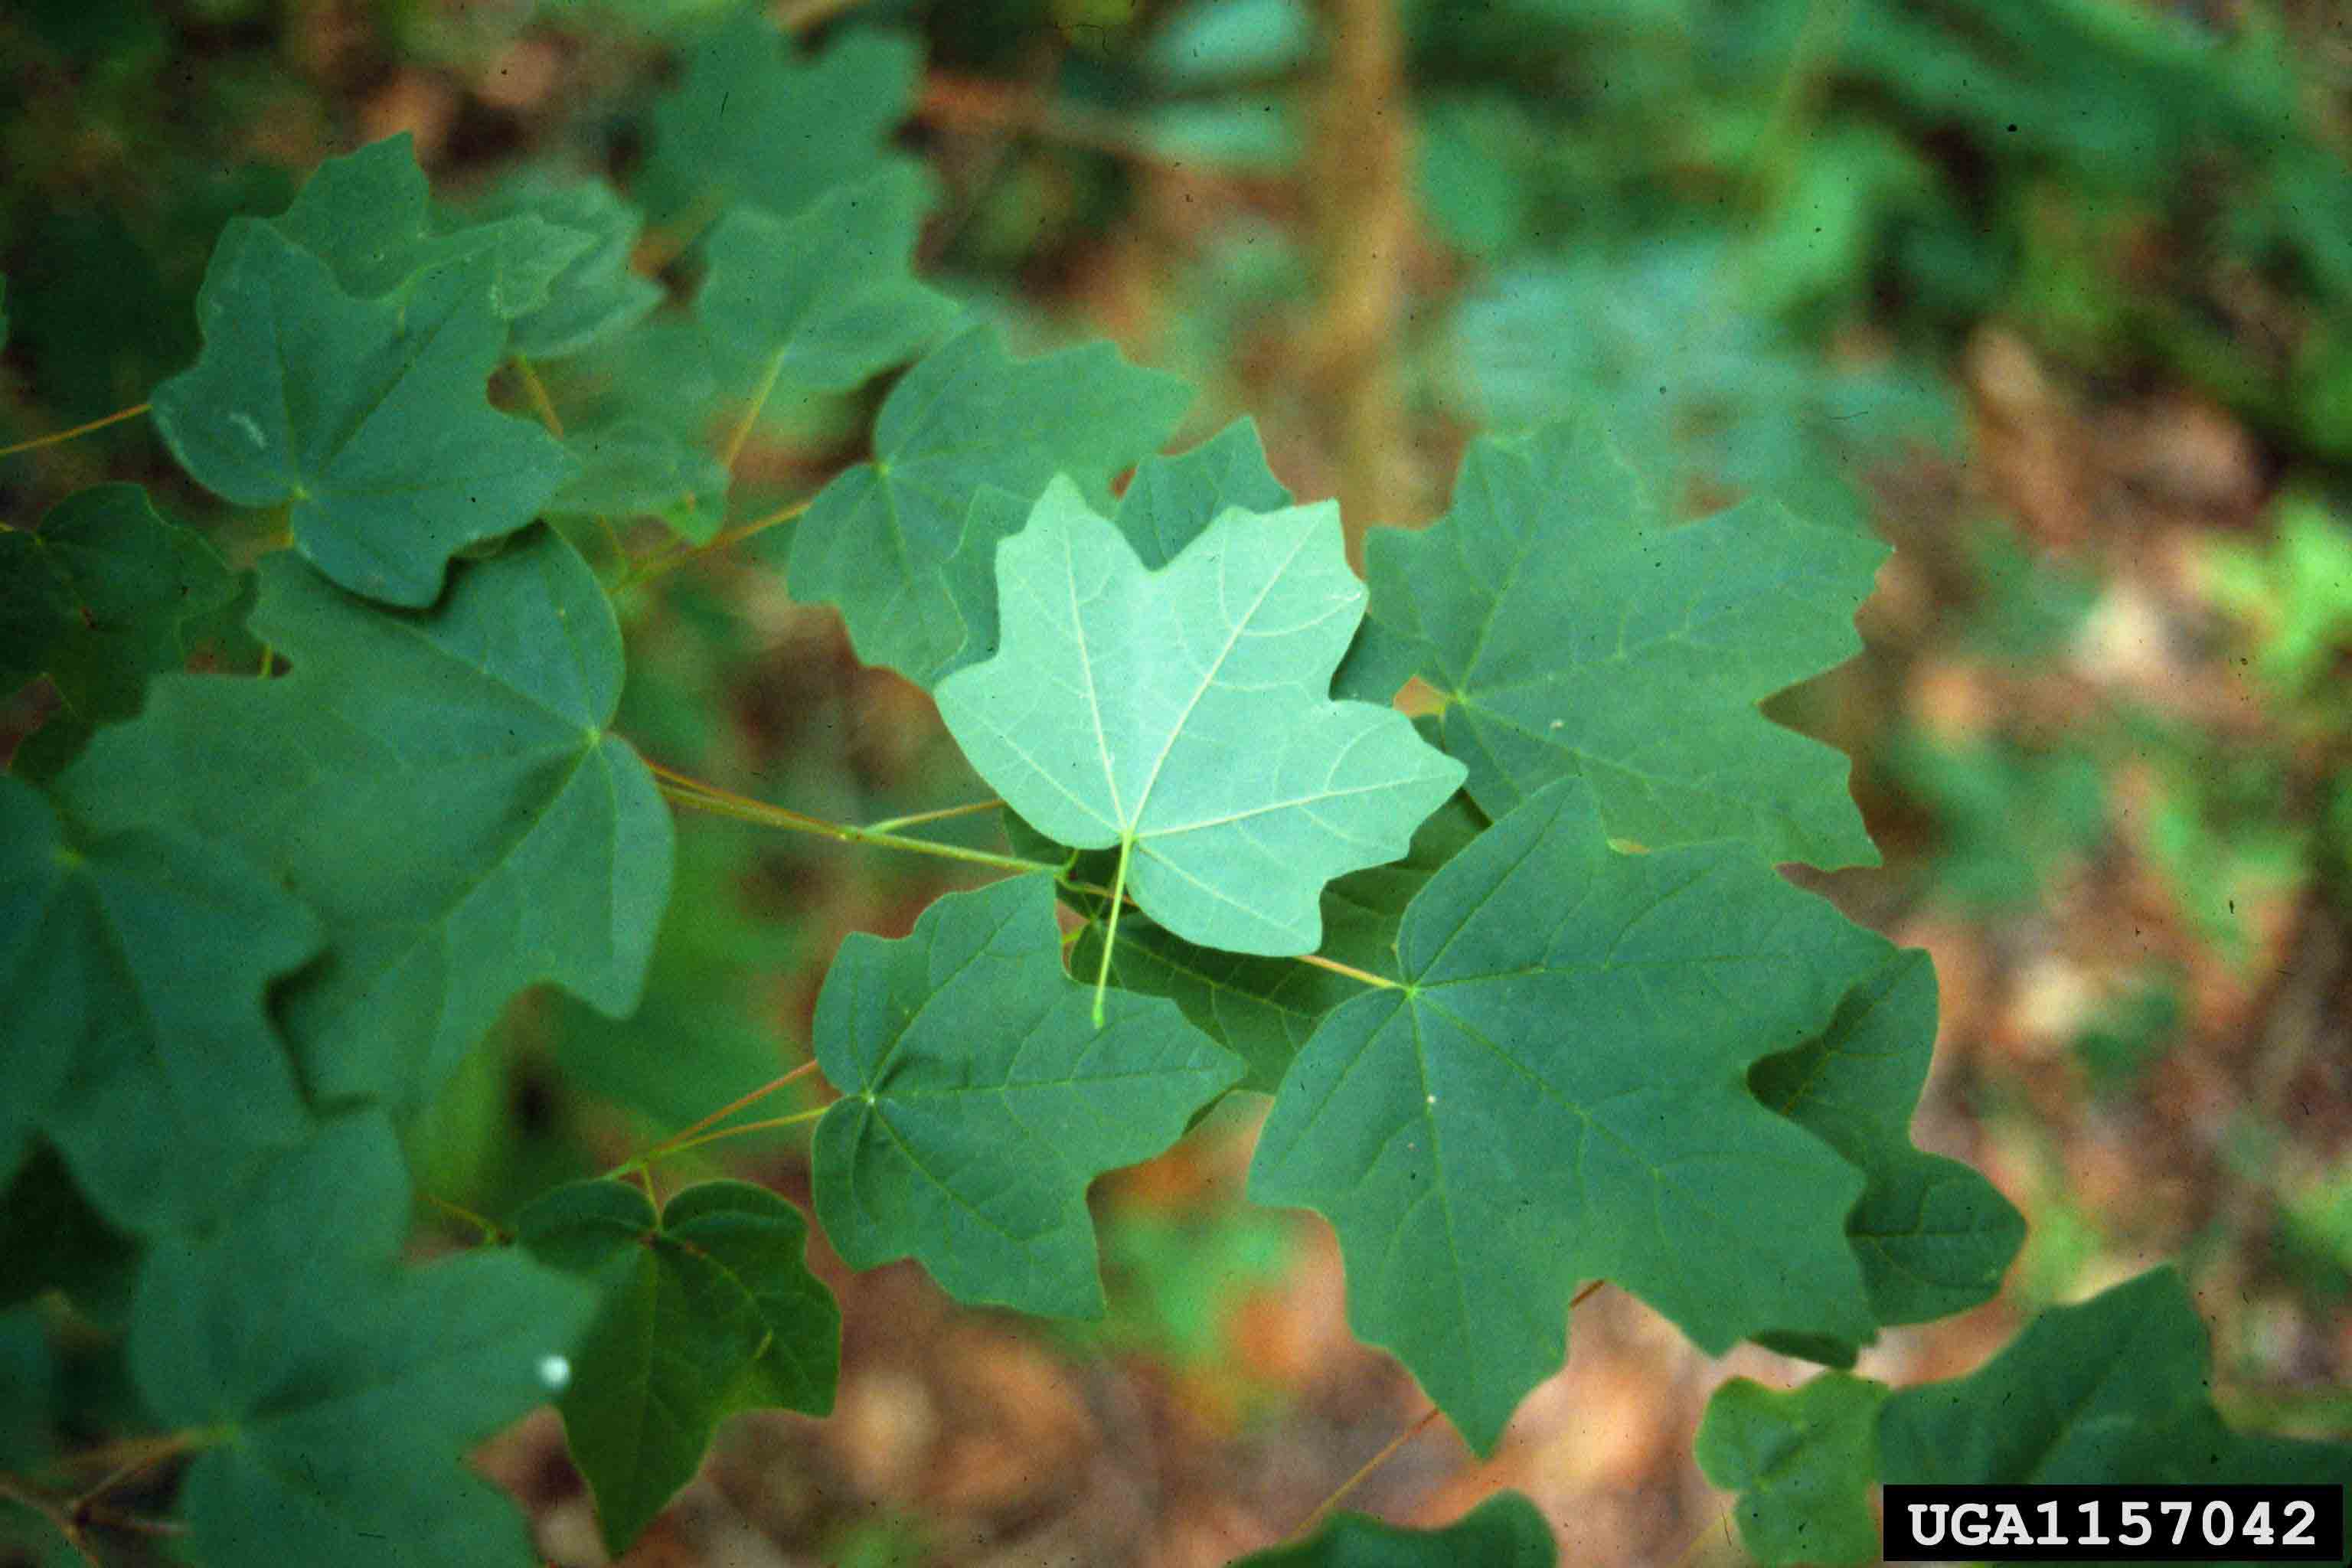 Southern sugar maple leaves, 1.5"-3" across, and showing whitish underside